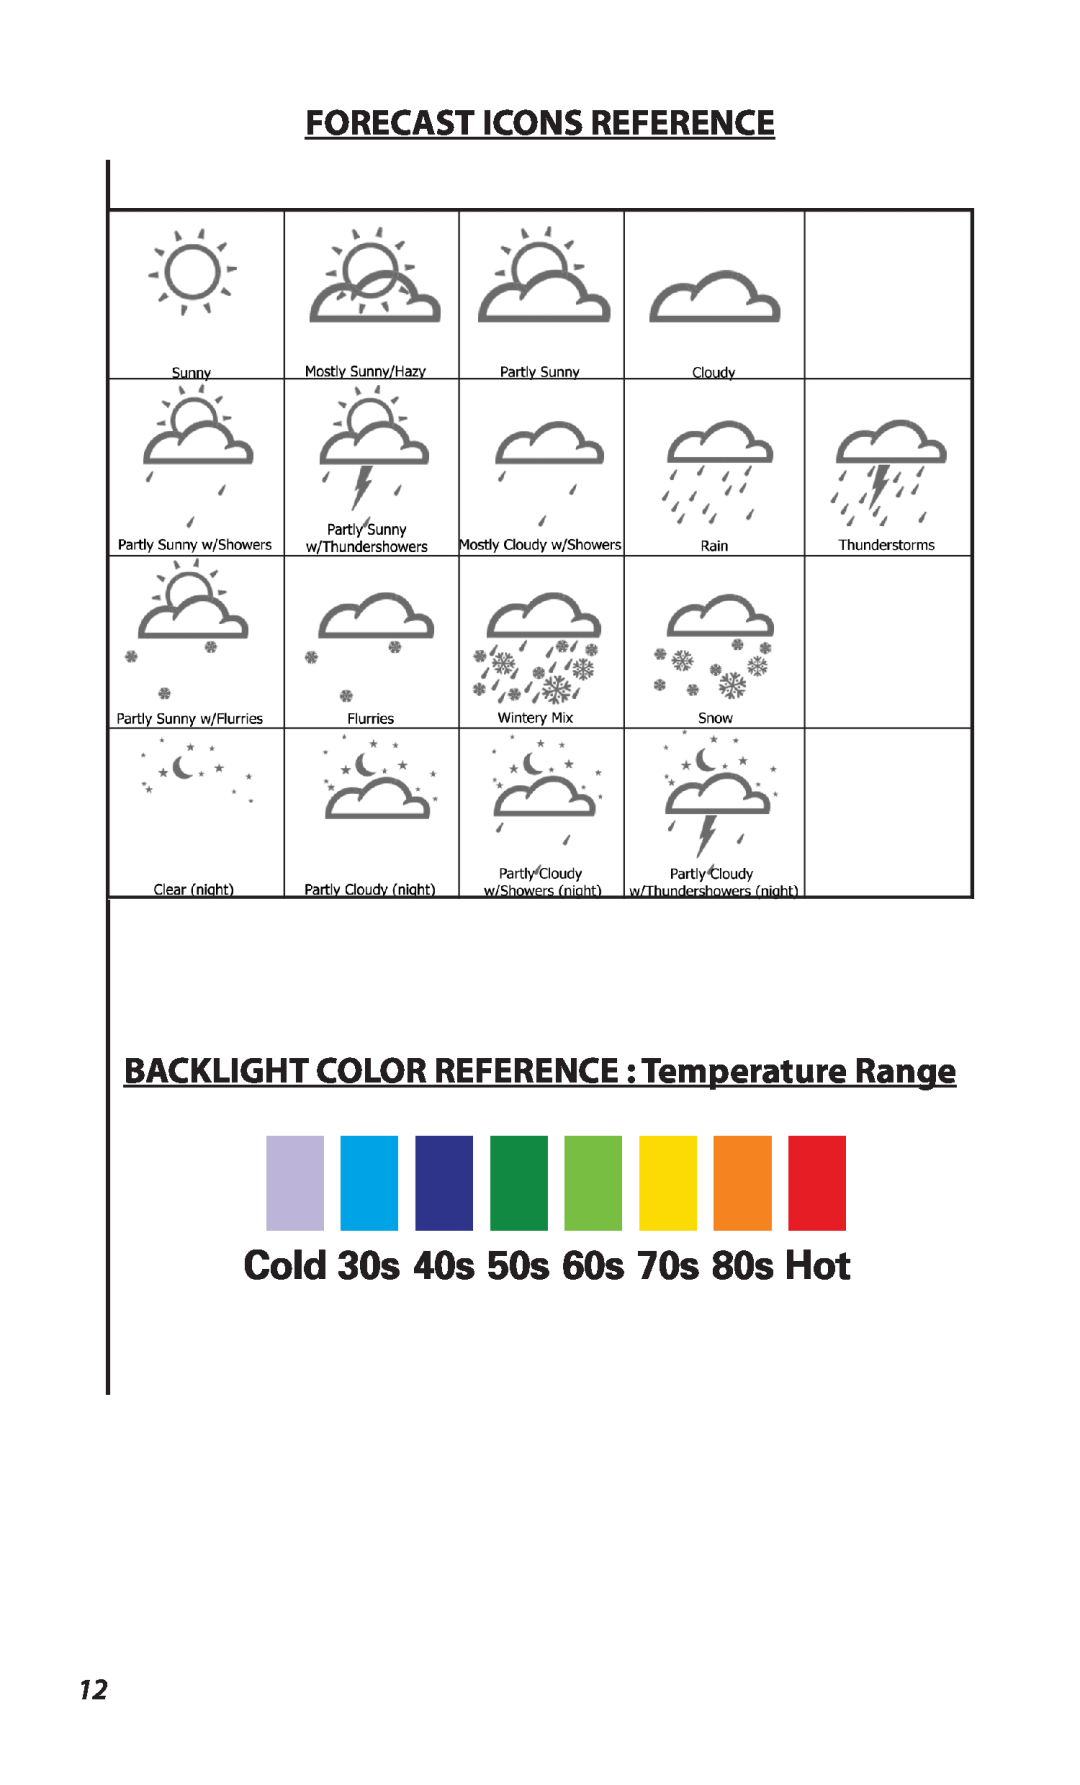 Bushnell 960900C instruction manual Forecast Icons Reference, BACKLIGHT COLOR REFERENCE Temperature Range 